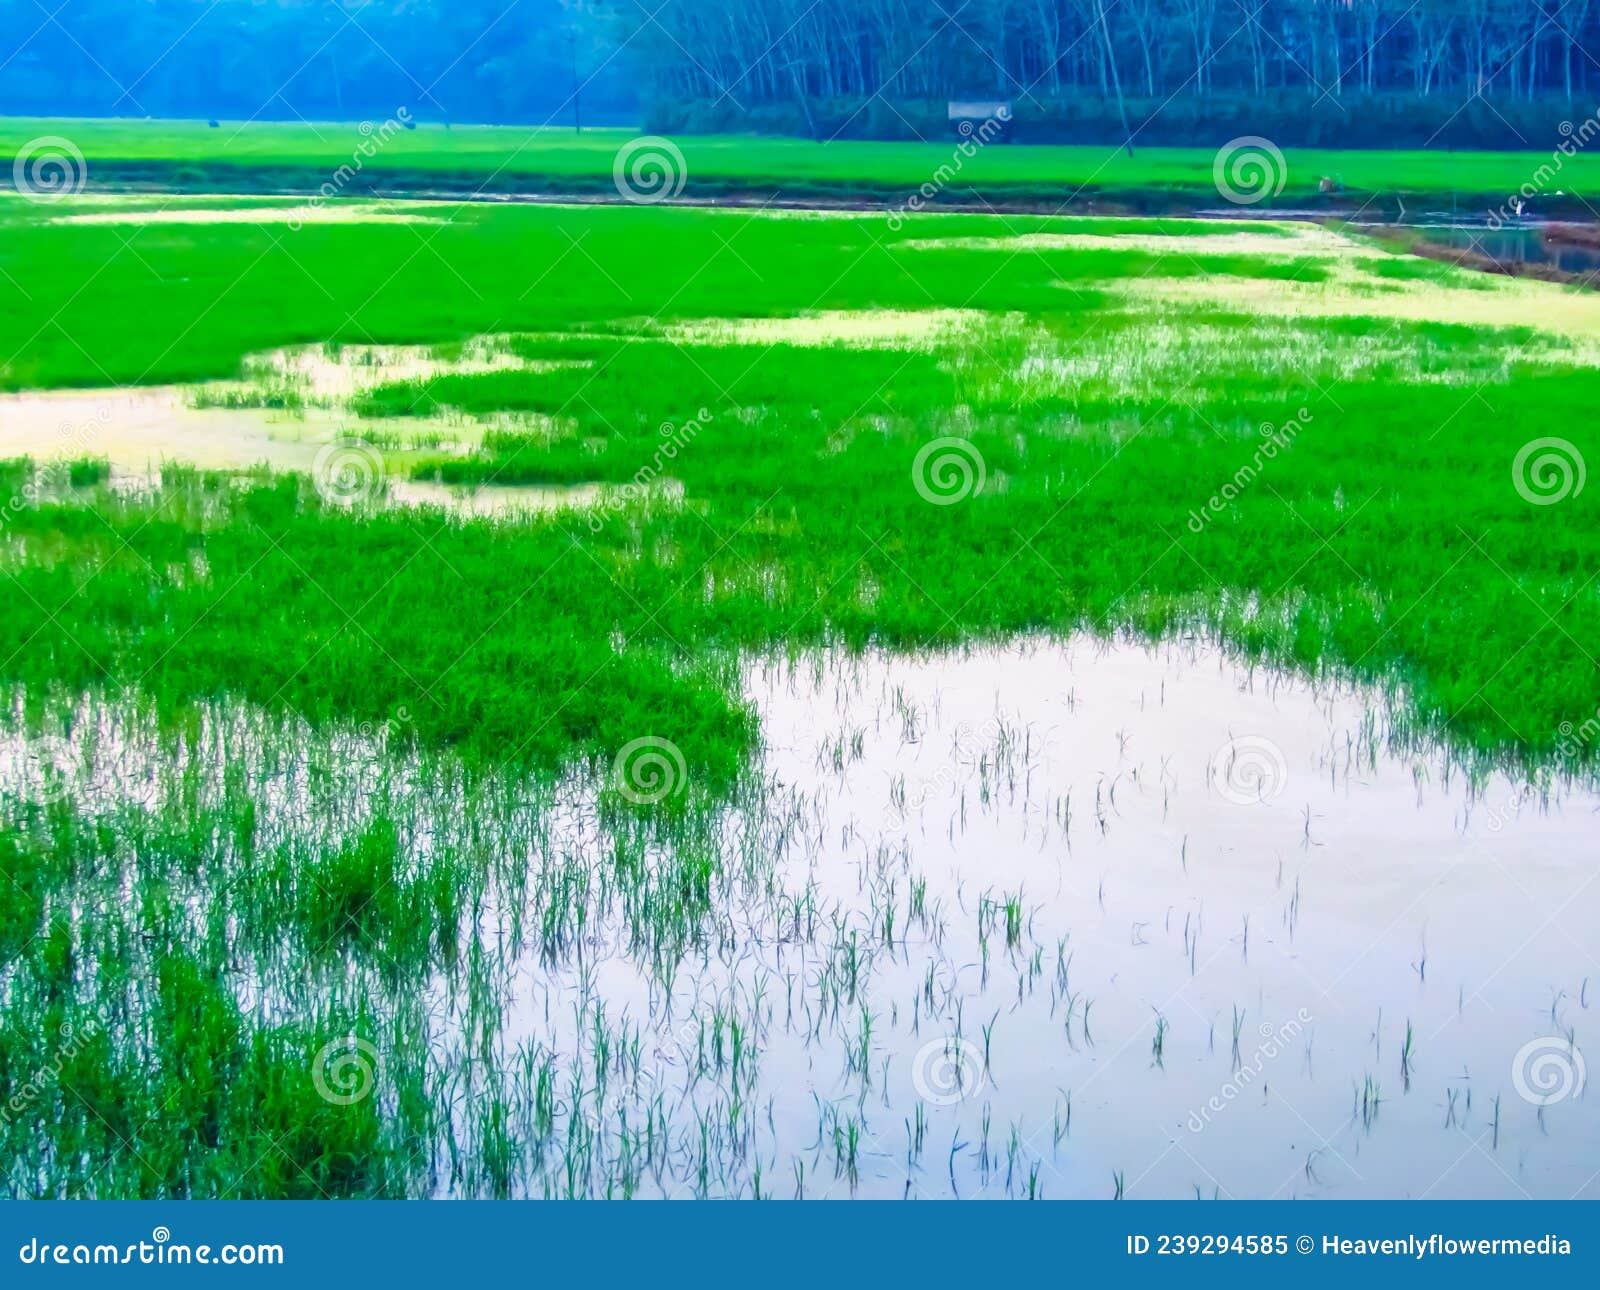 paddy field filled with water after conceive